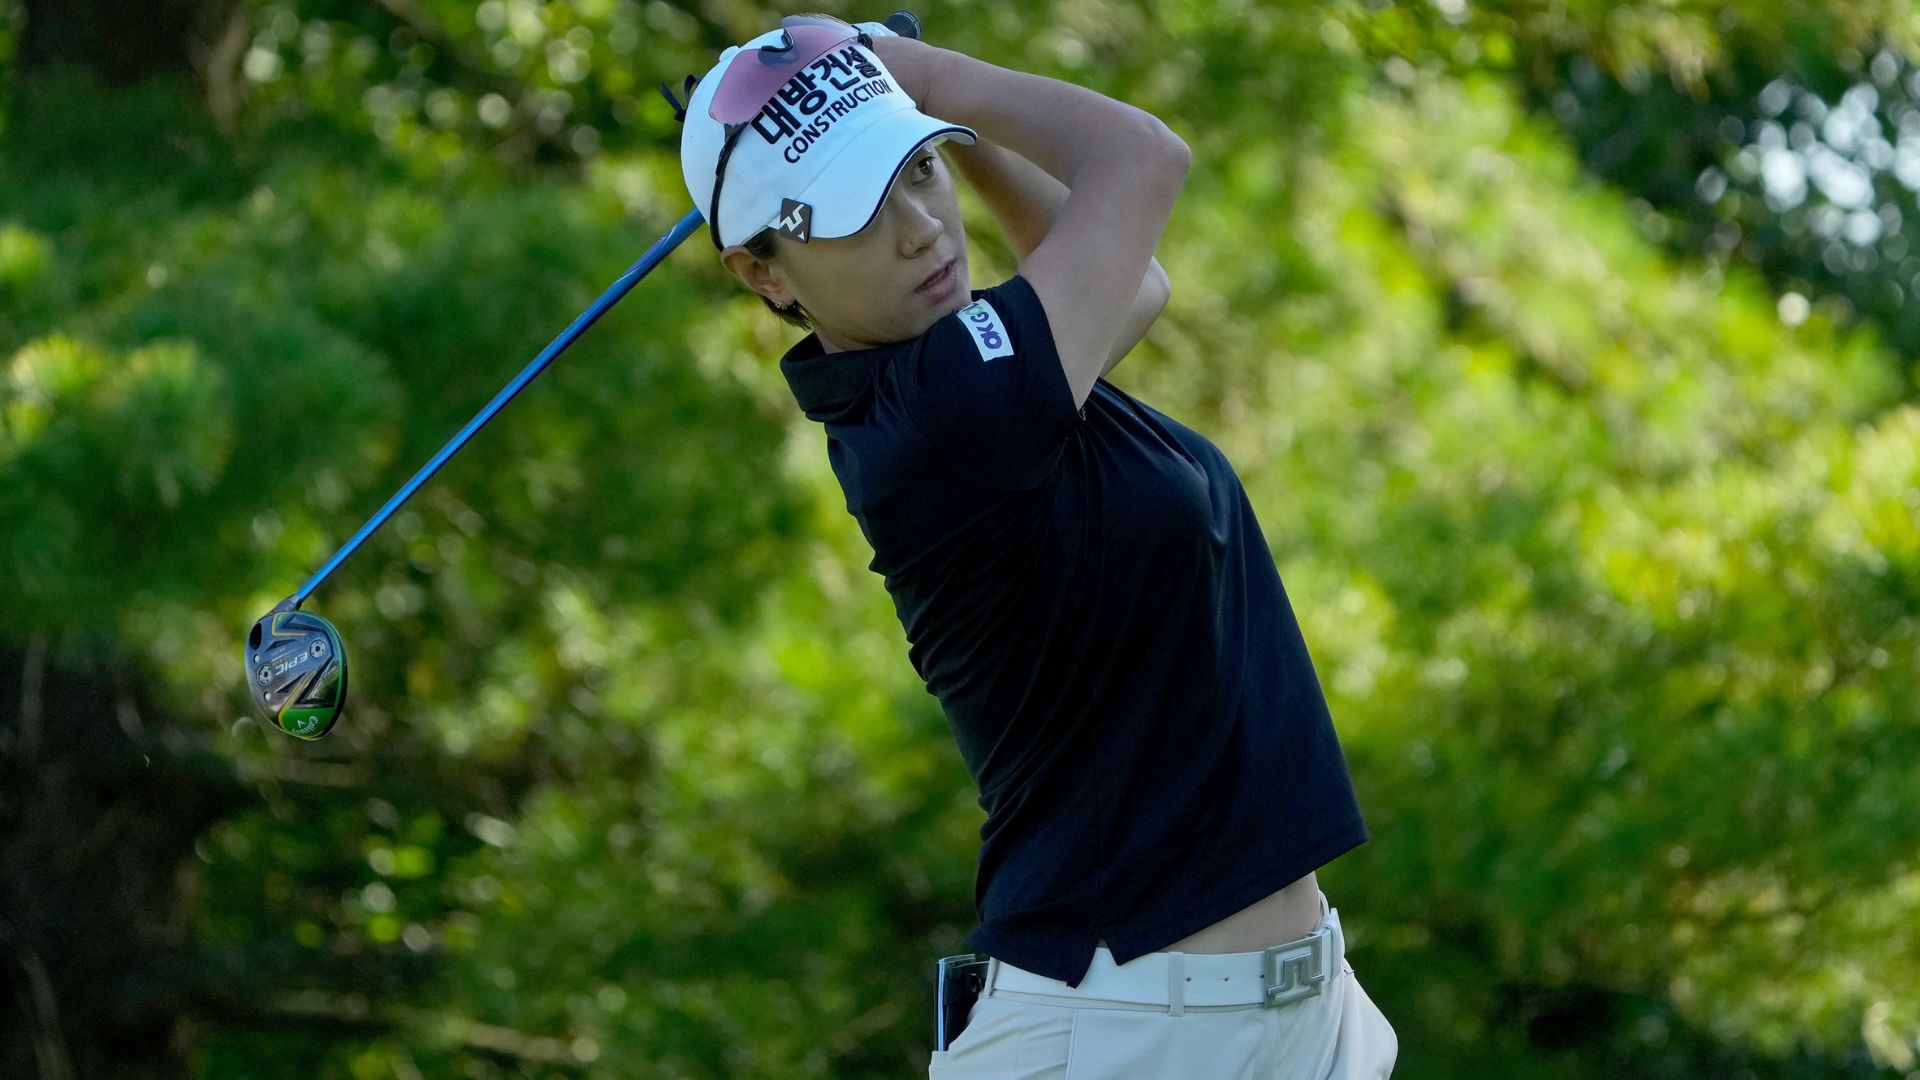 Major champion Na Yeon Choi ‘got goosebumps’ with ace in final LPGA event, BMW Ladies Championship